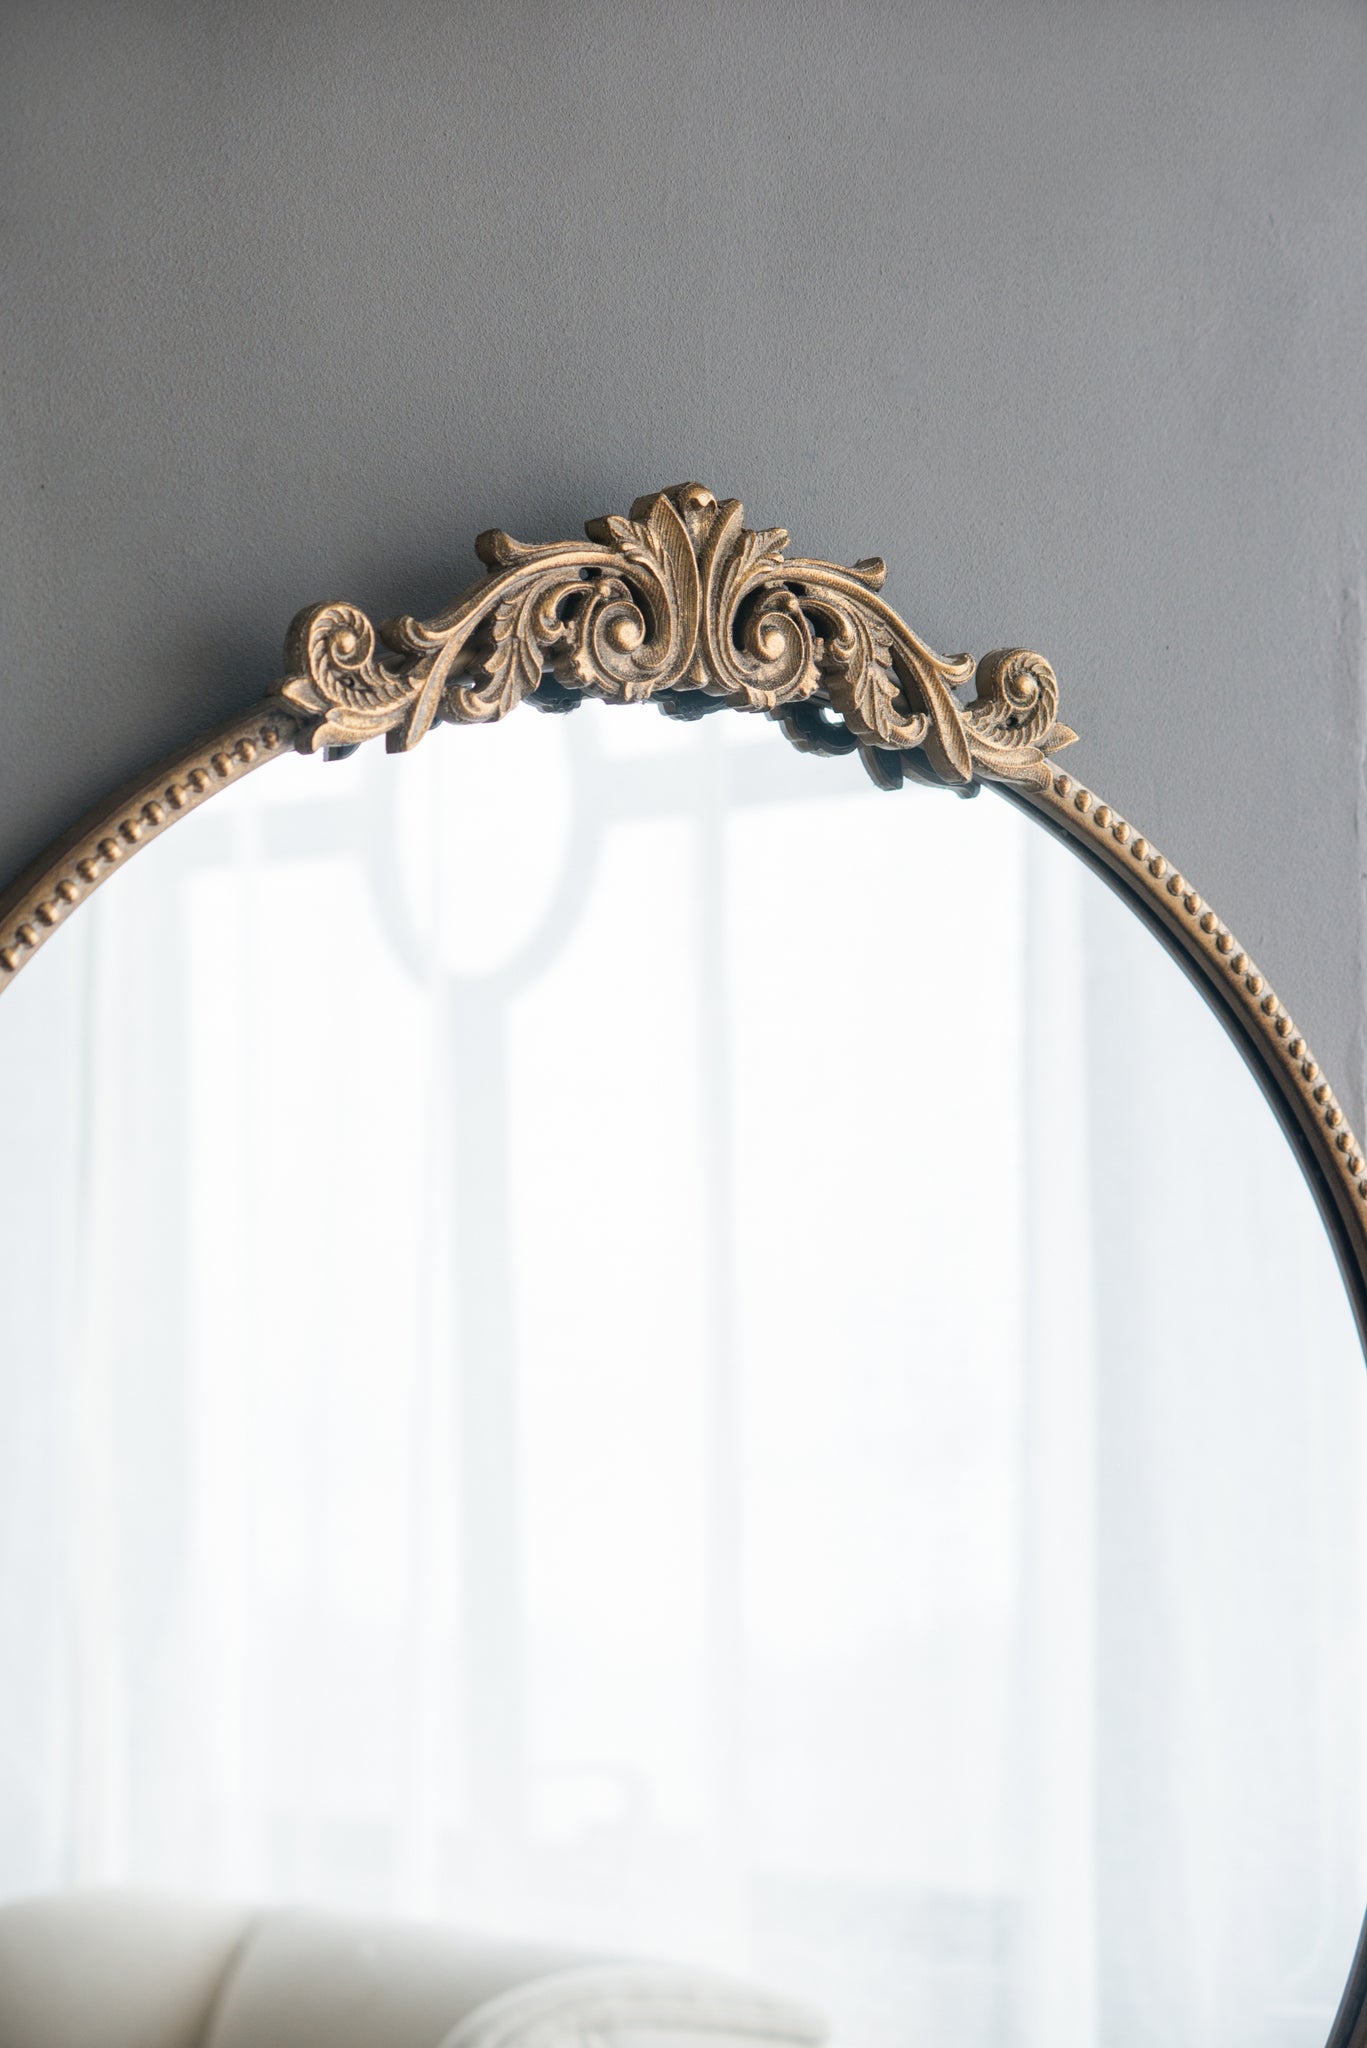 30" x 32" Round Gold Mirror, Wall Mounted Mirror with gold-mdf+glass